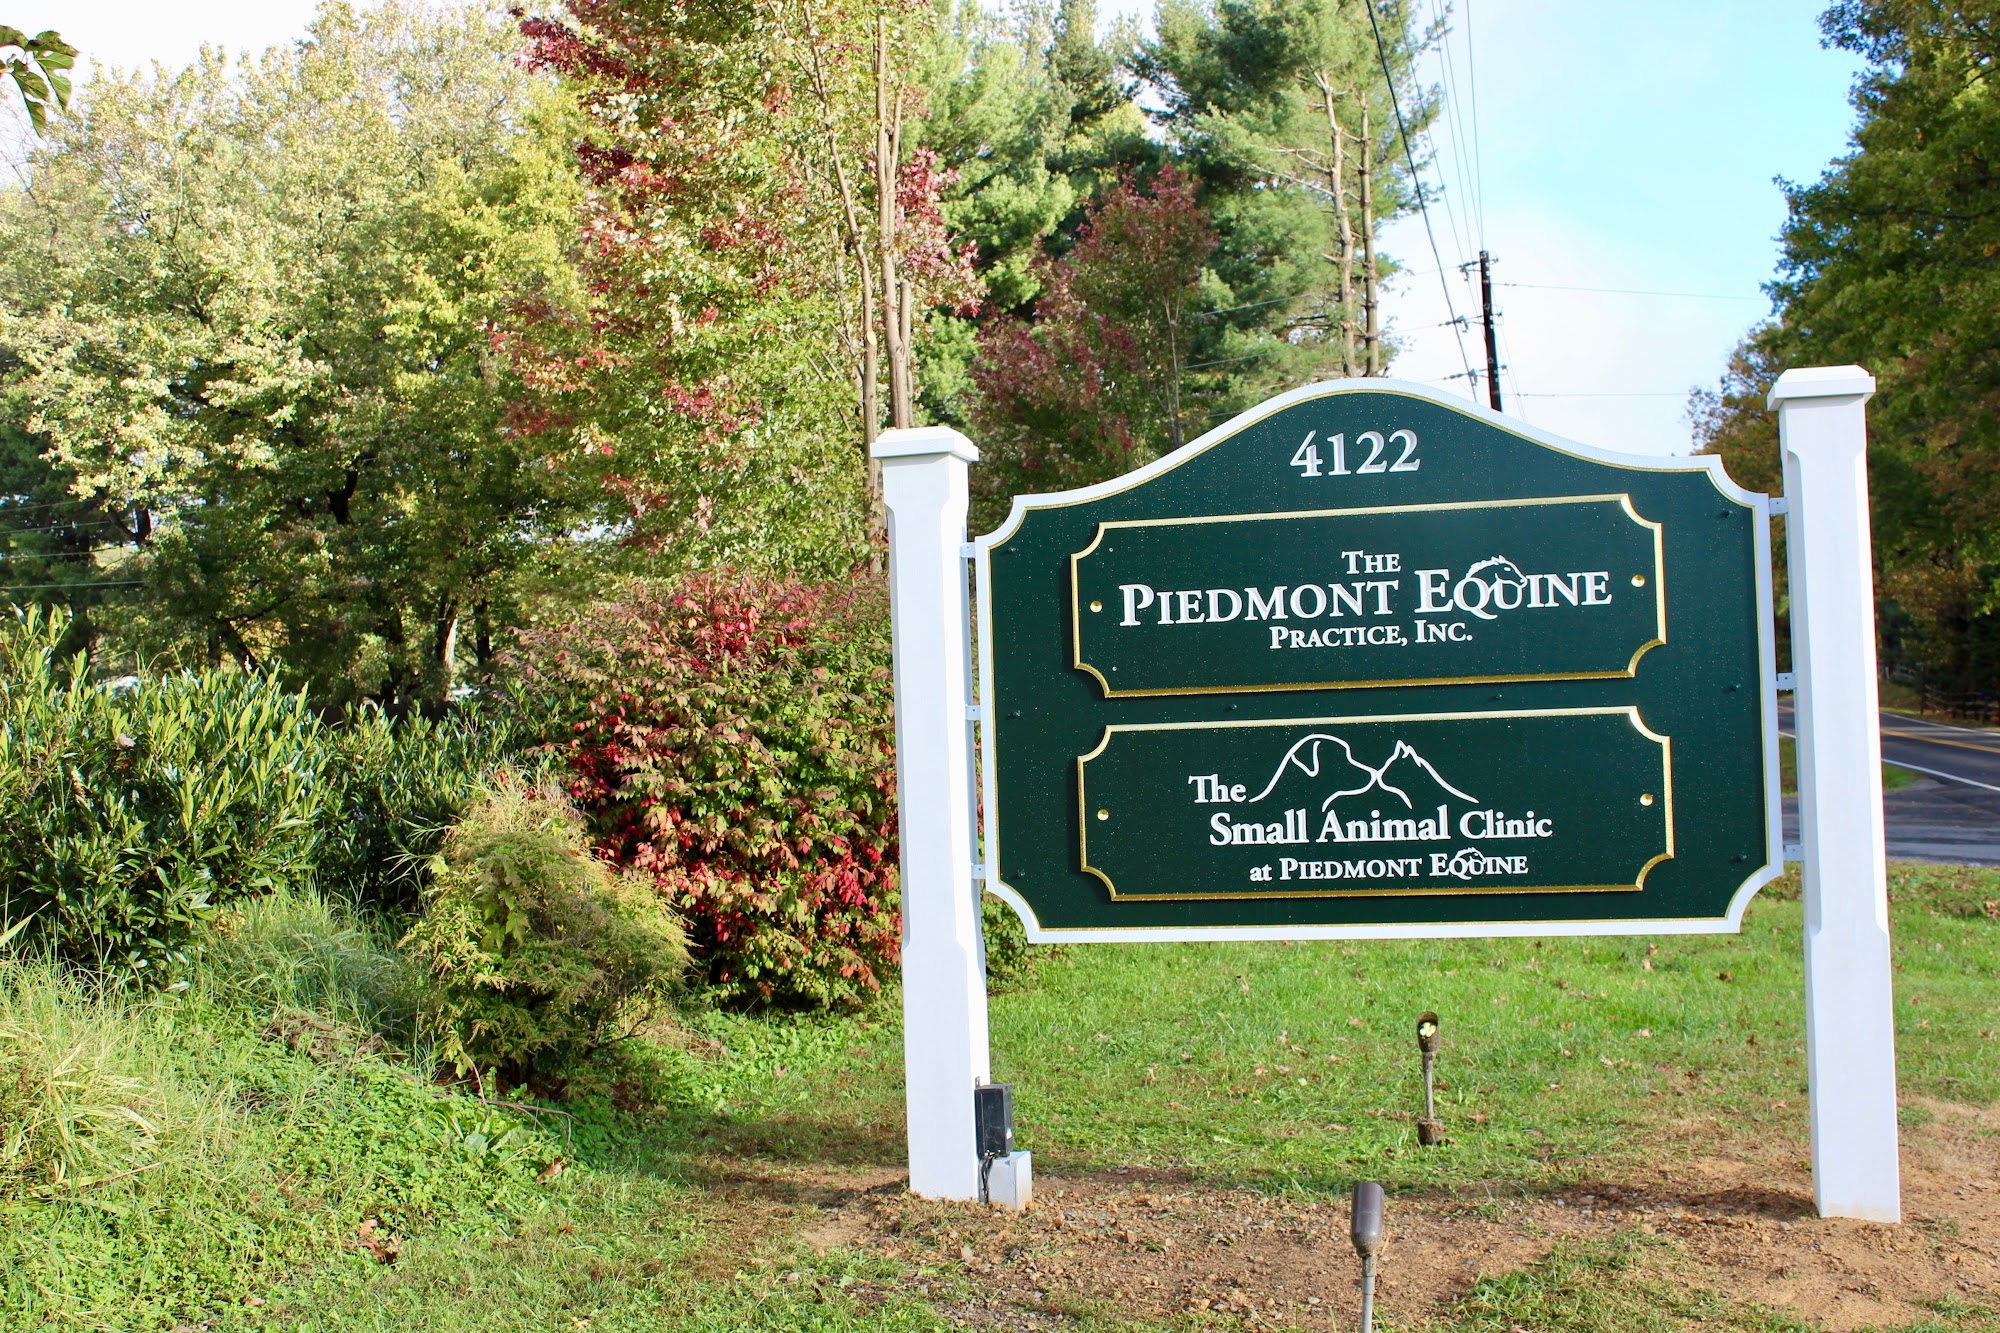 The Small Animal Clinic at Piedmont Equine